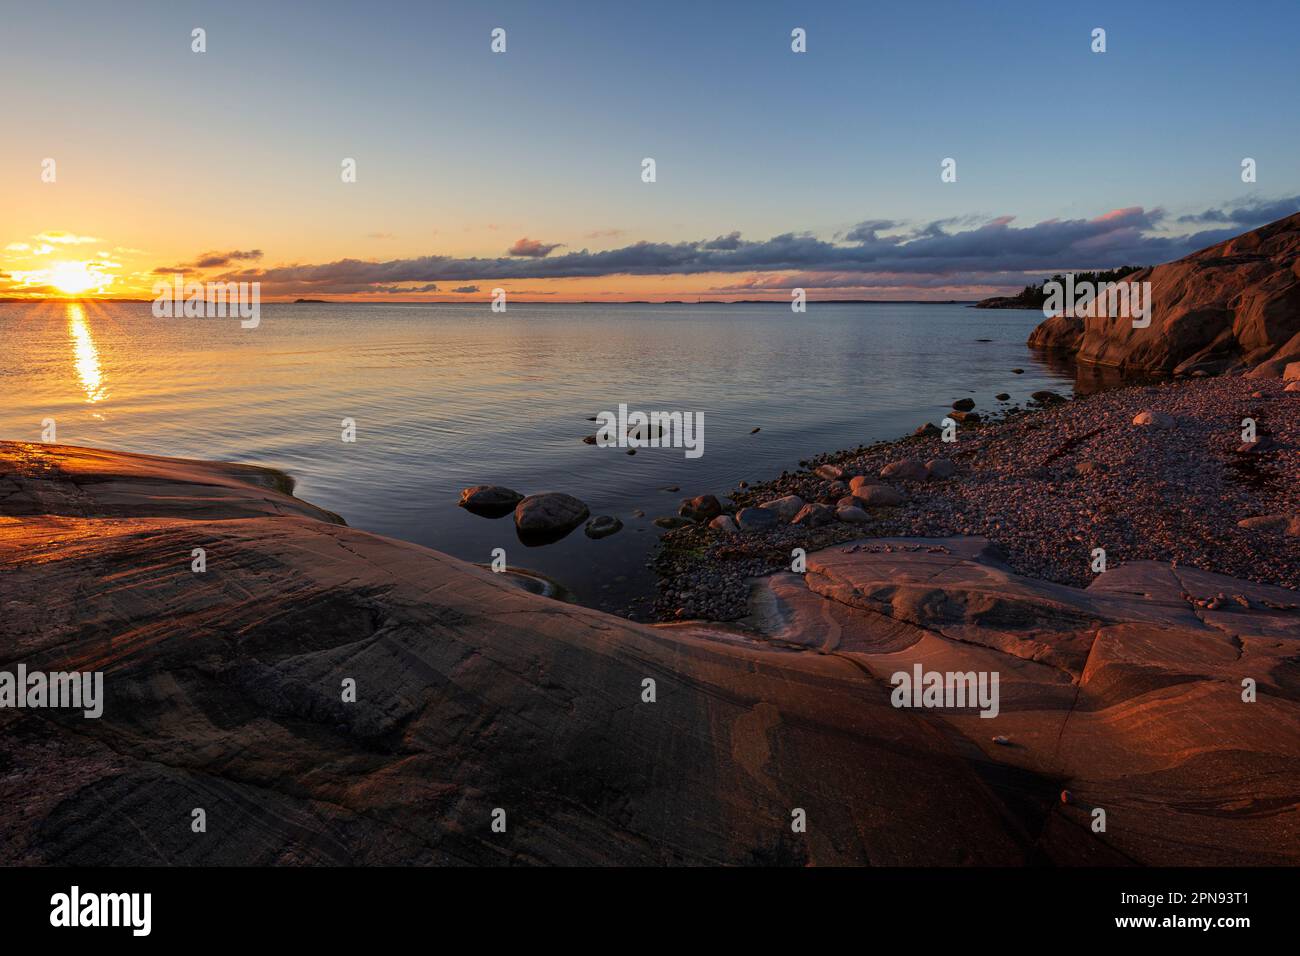 Beautiful view of rocky pebble beach, cliff and the Baltic Sea in Hanko, Finland, at sunset in the summer. Stock Photo